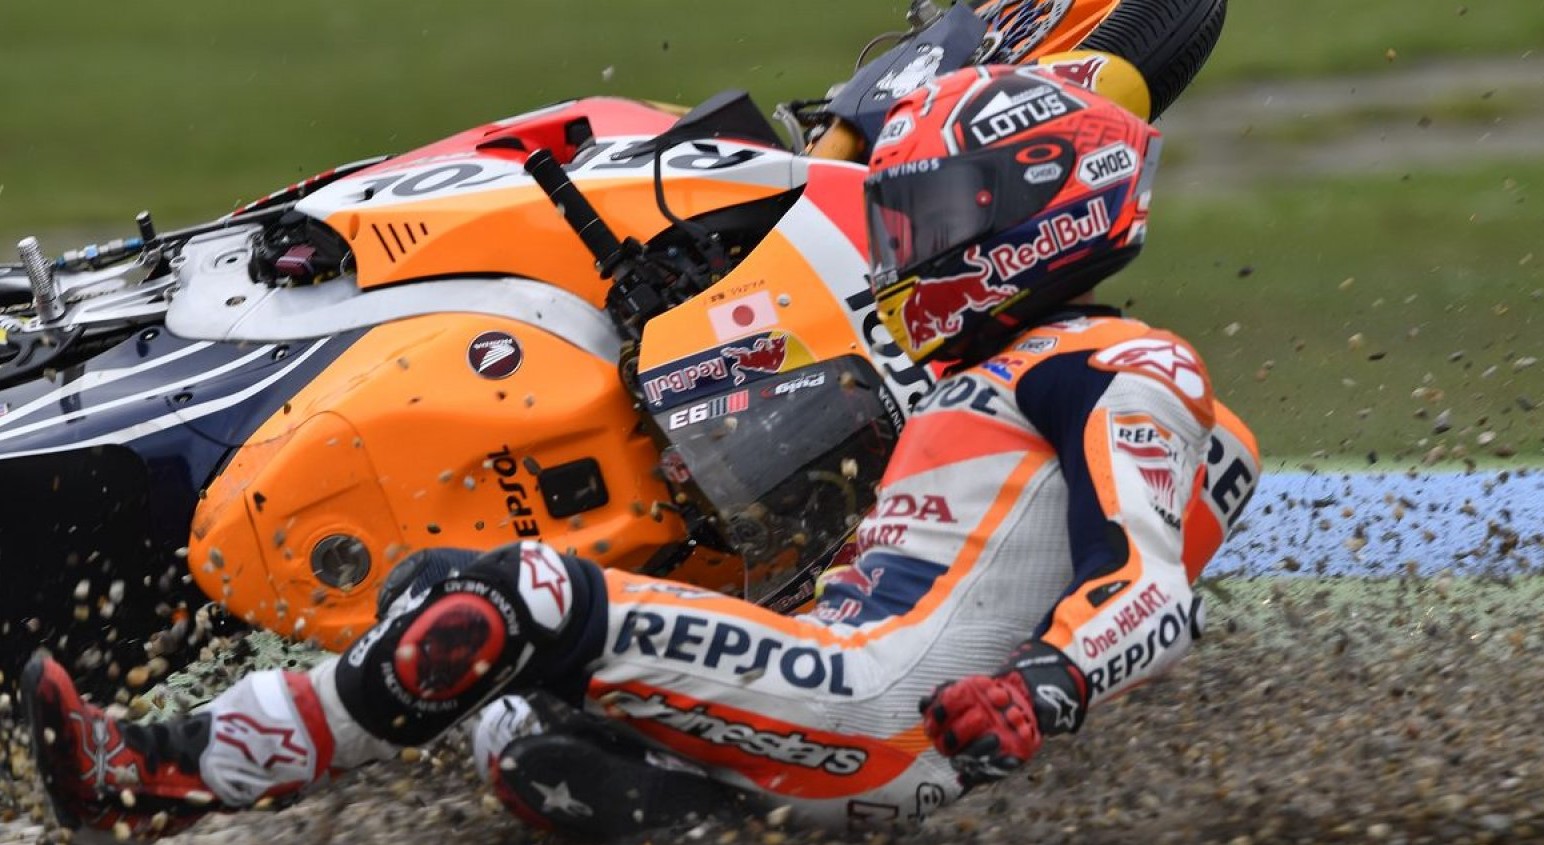 MotoGP – Why does Marquez crash so much?